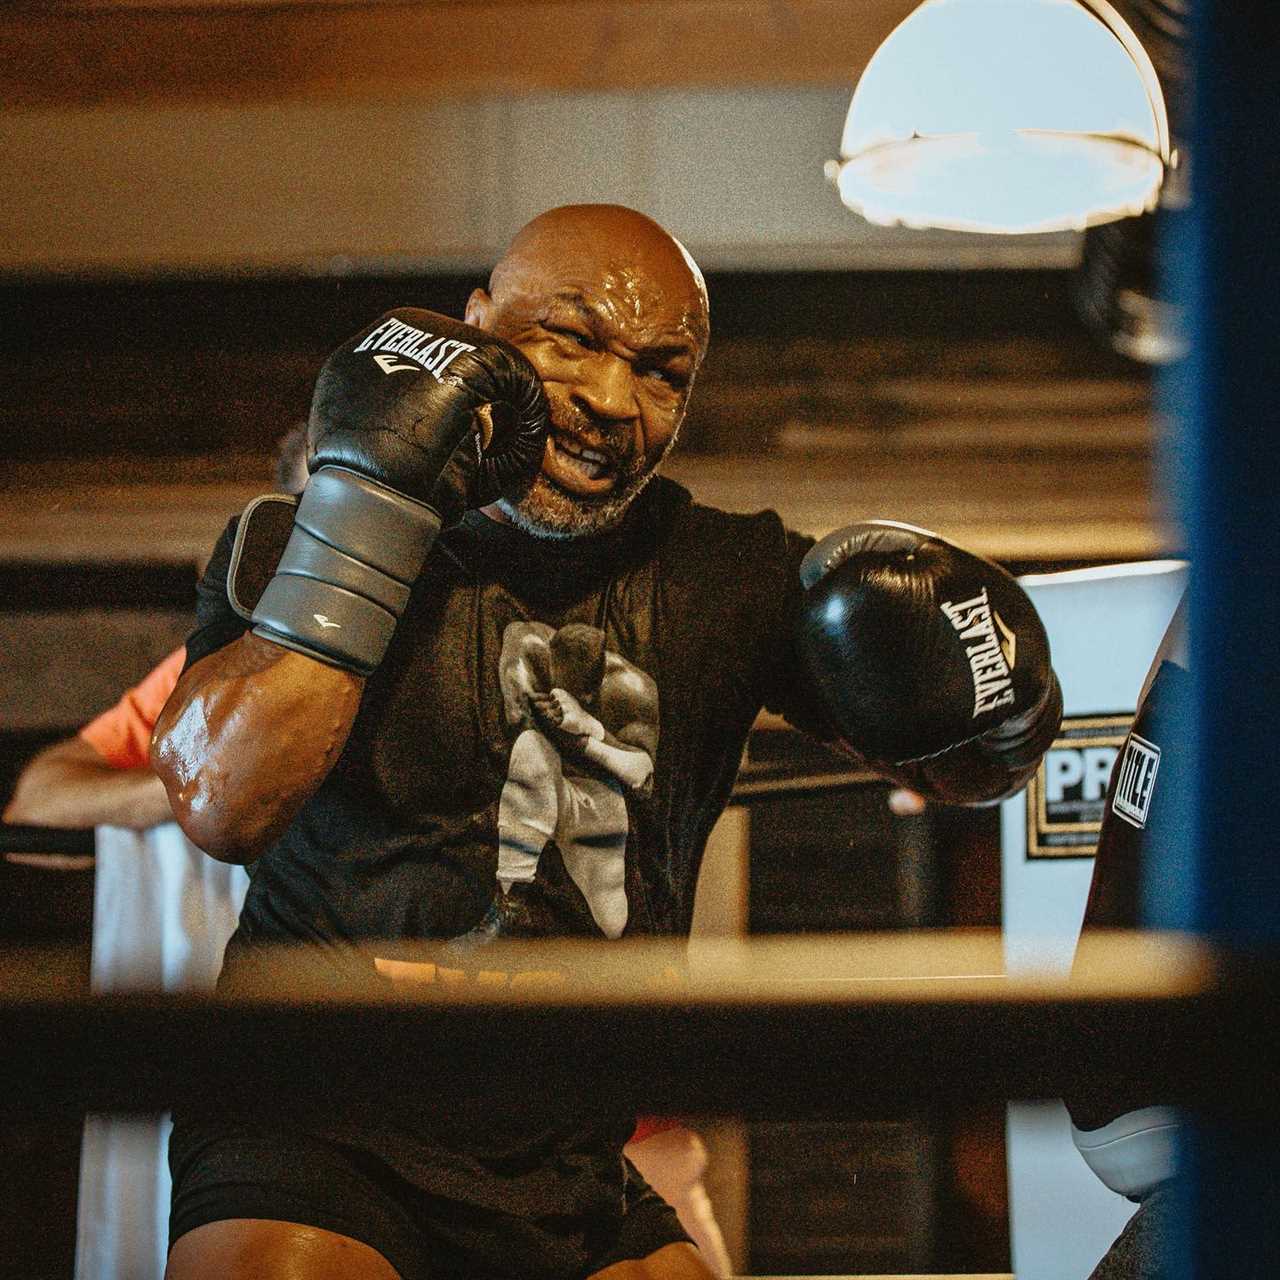 Mike Tyson predicts Anthony Joshua vs Oleksandr Uzyk. He tells Brit what he MUST DO to win